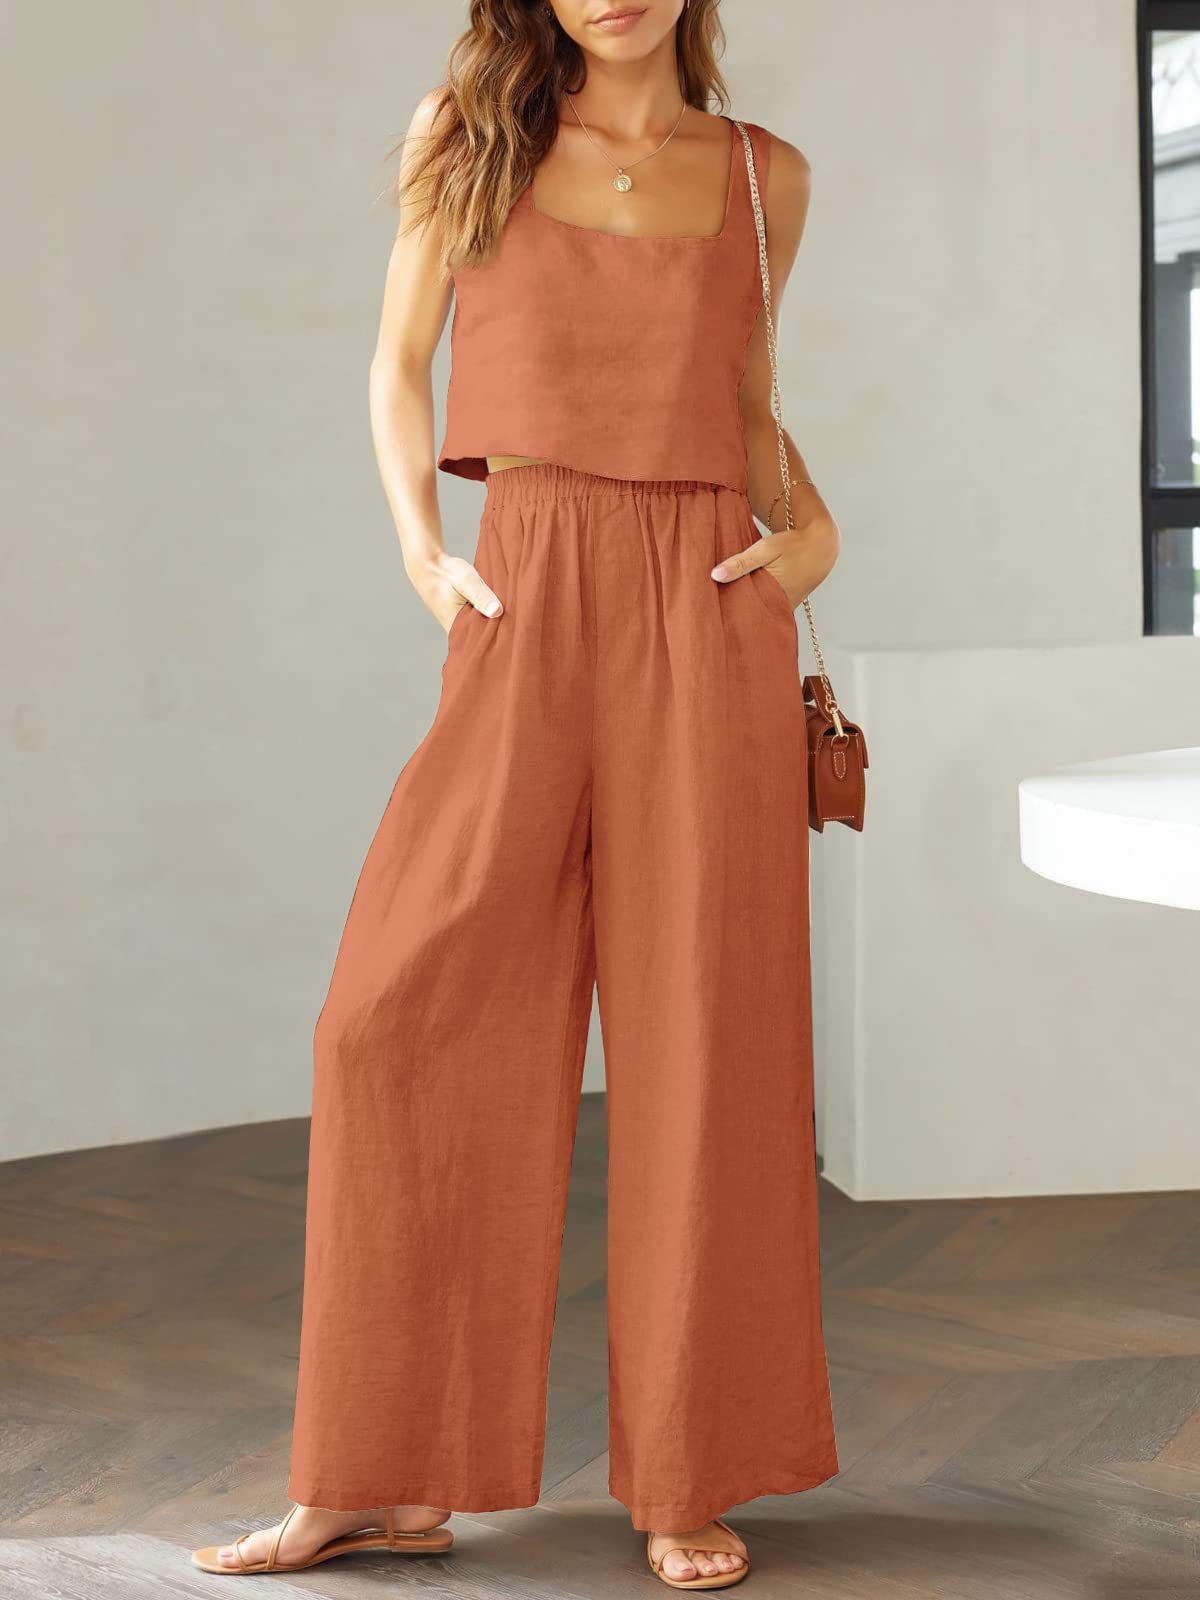 NTG Fad SUIT Rust red / S Cotton linen sleeveless camisole wide-leg trousers casual suit